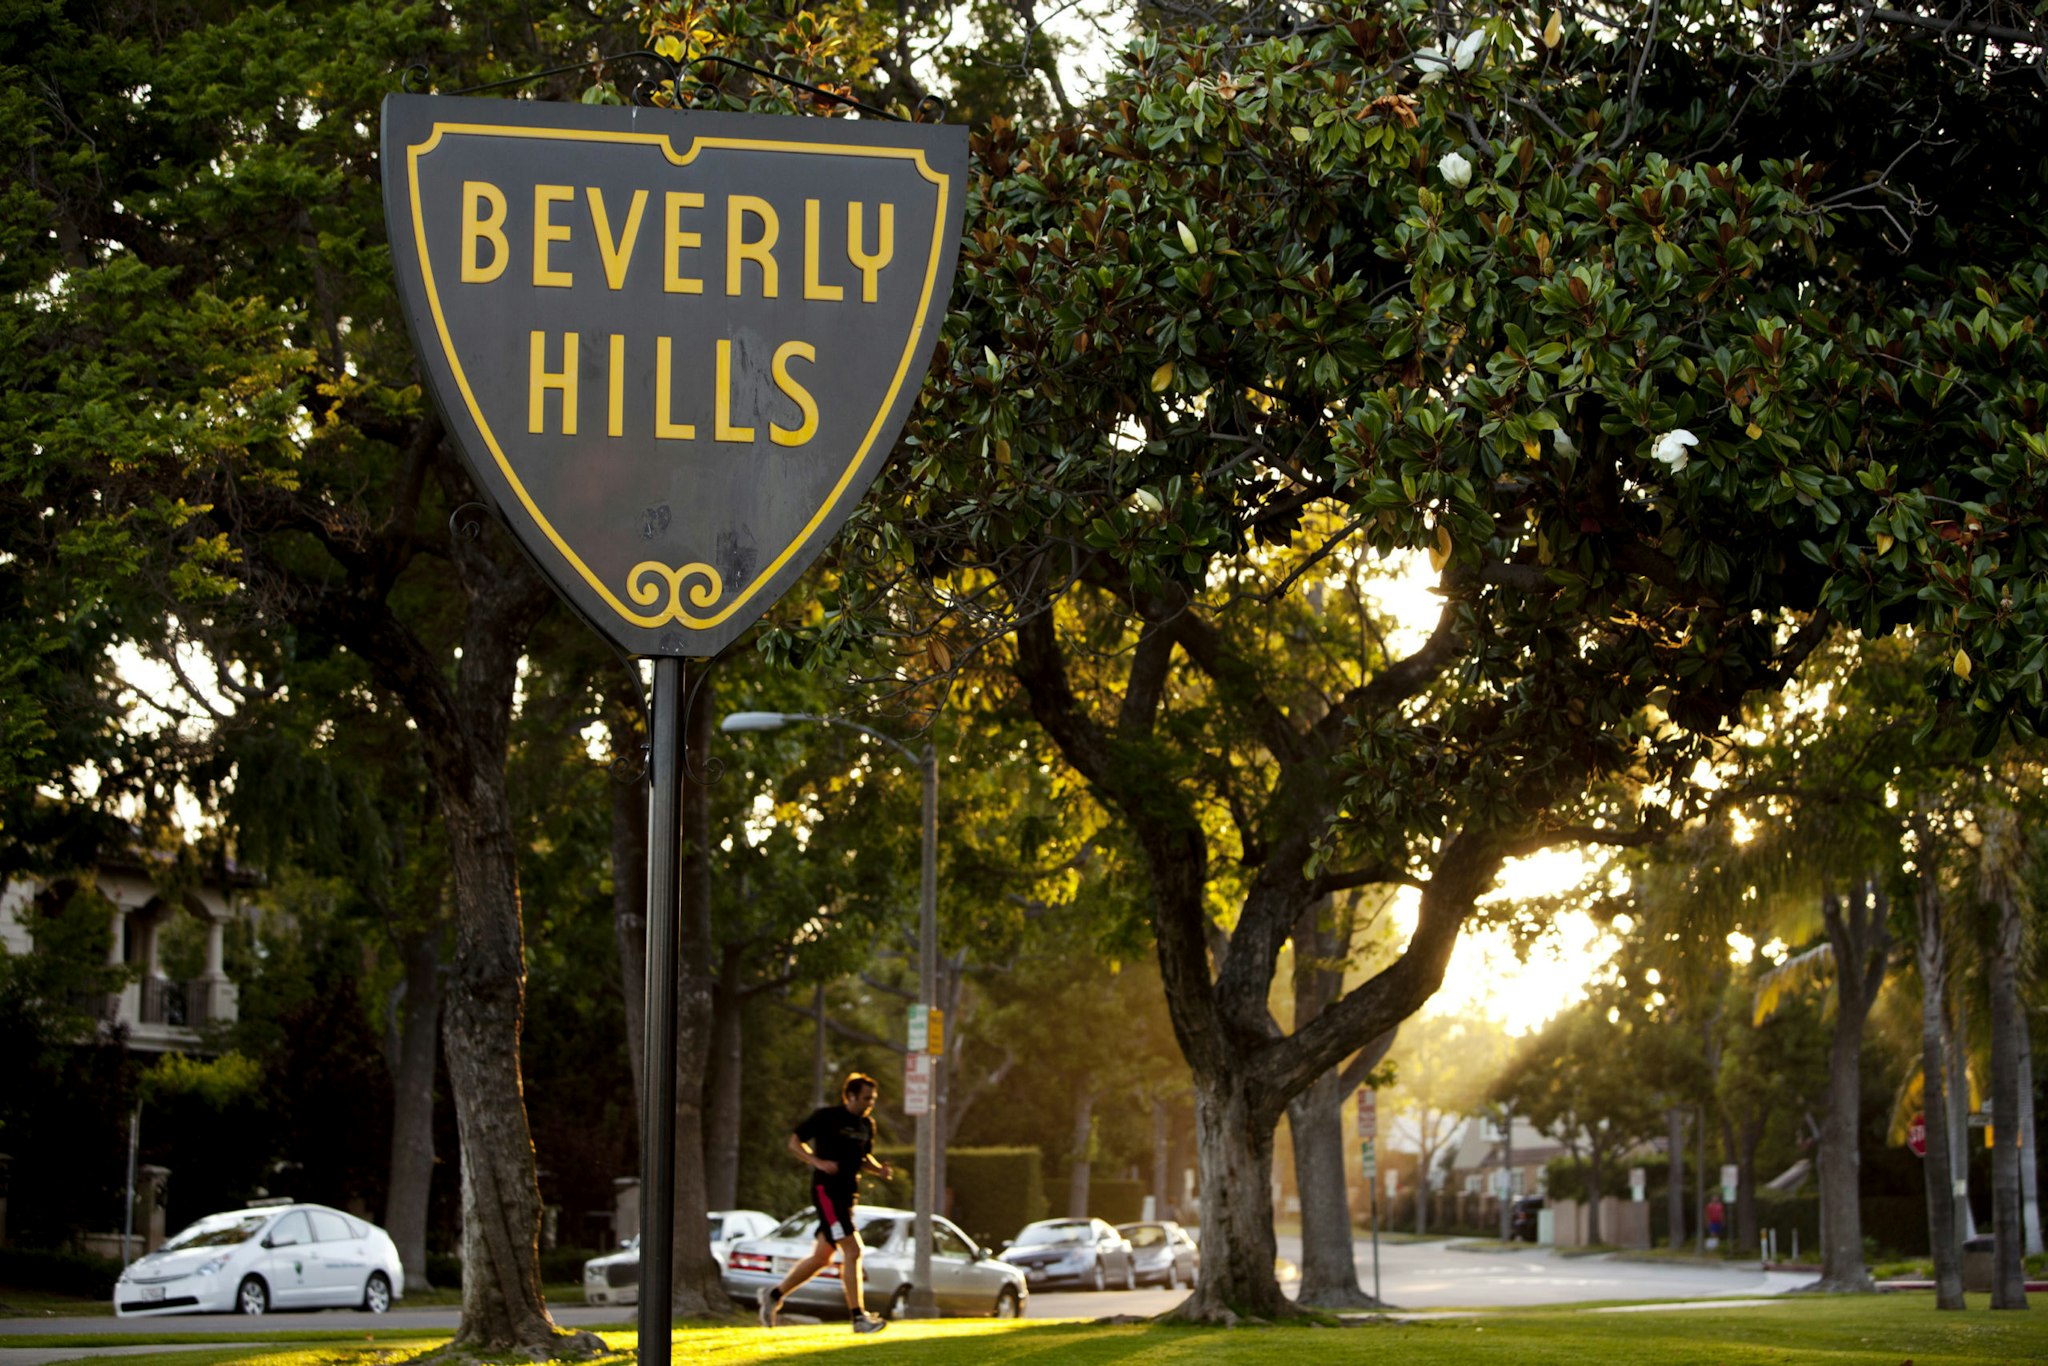 The official seal of the city of Beverly Hills is displayed on a sign in Beverly Hills, California, U.S., on Tuesday, July 26, 2011. Global sales of luxury goods may rise 8 percent in 2011 excluding currency swings as demand strengthens in the U.S. and Europe and emerging-market shoppers splurge, Bain & Co. estimated in May. Photographer: Konrad Fiedler/Bloomberg via Getty Images